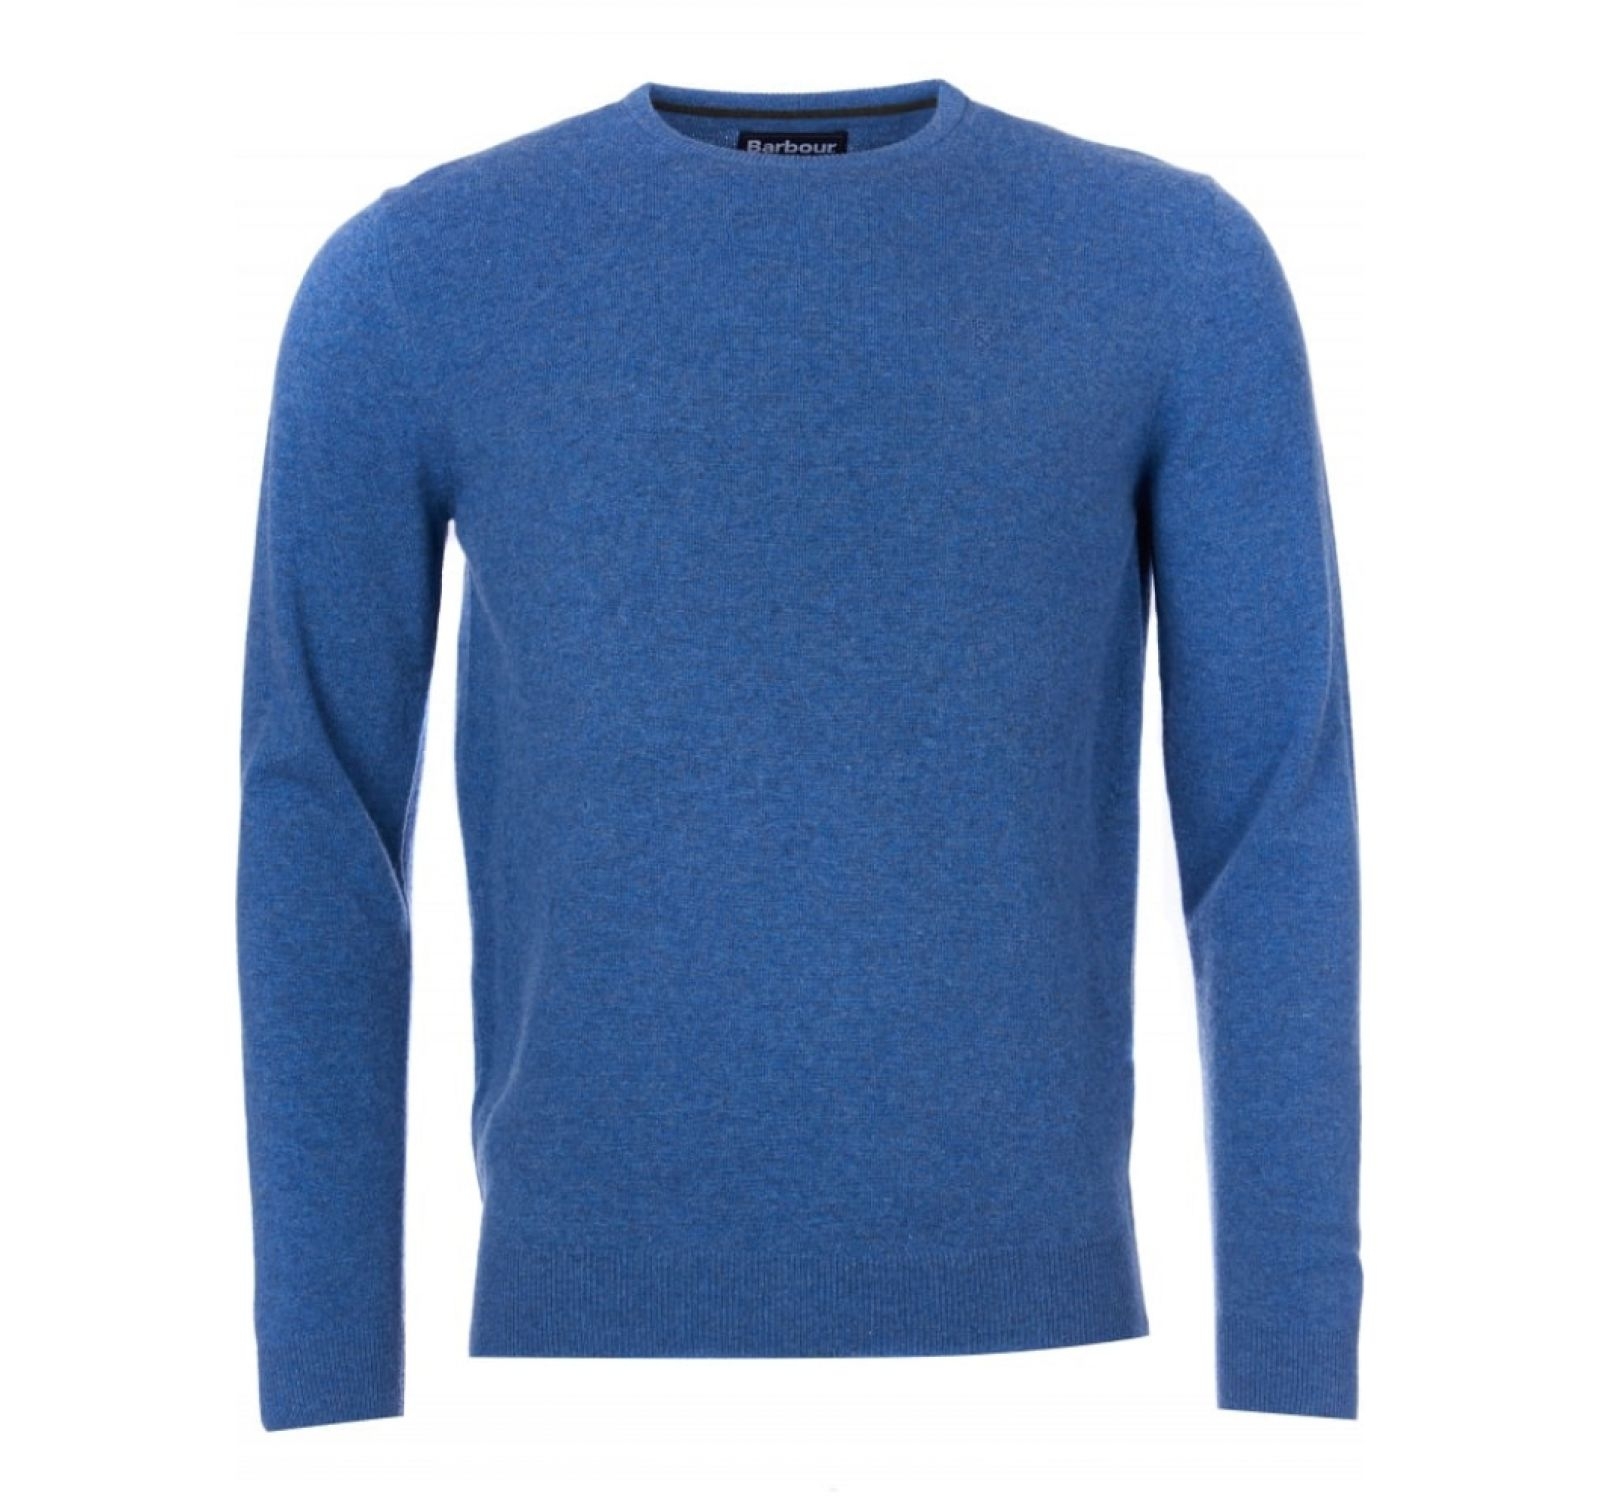 Barbour Essential Crew Neck Sweater at Cox the Saddler